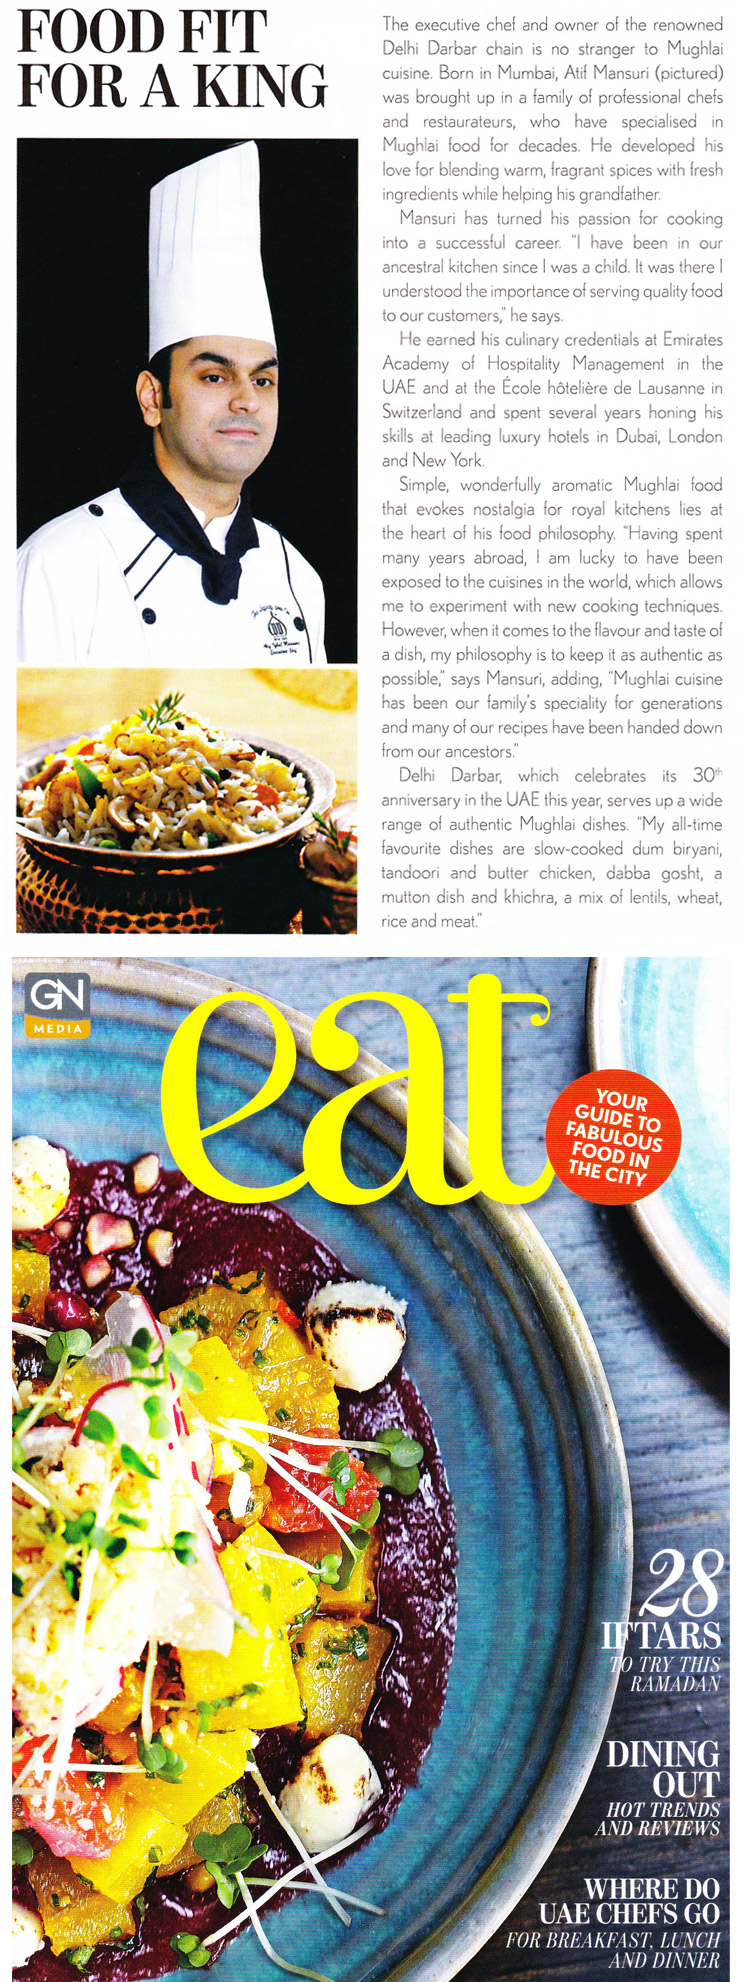 EAT-Magazine---Food-Fit-for-a-King---18-June-2015